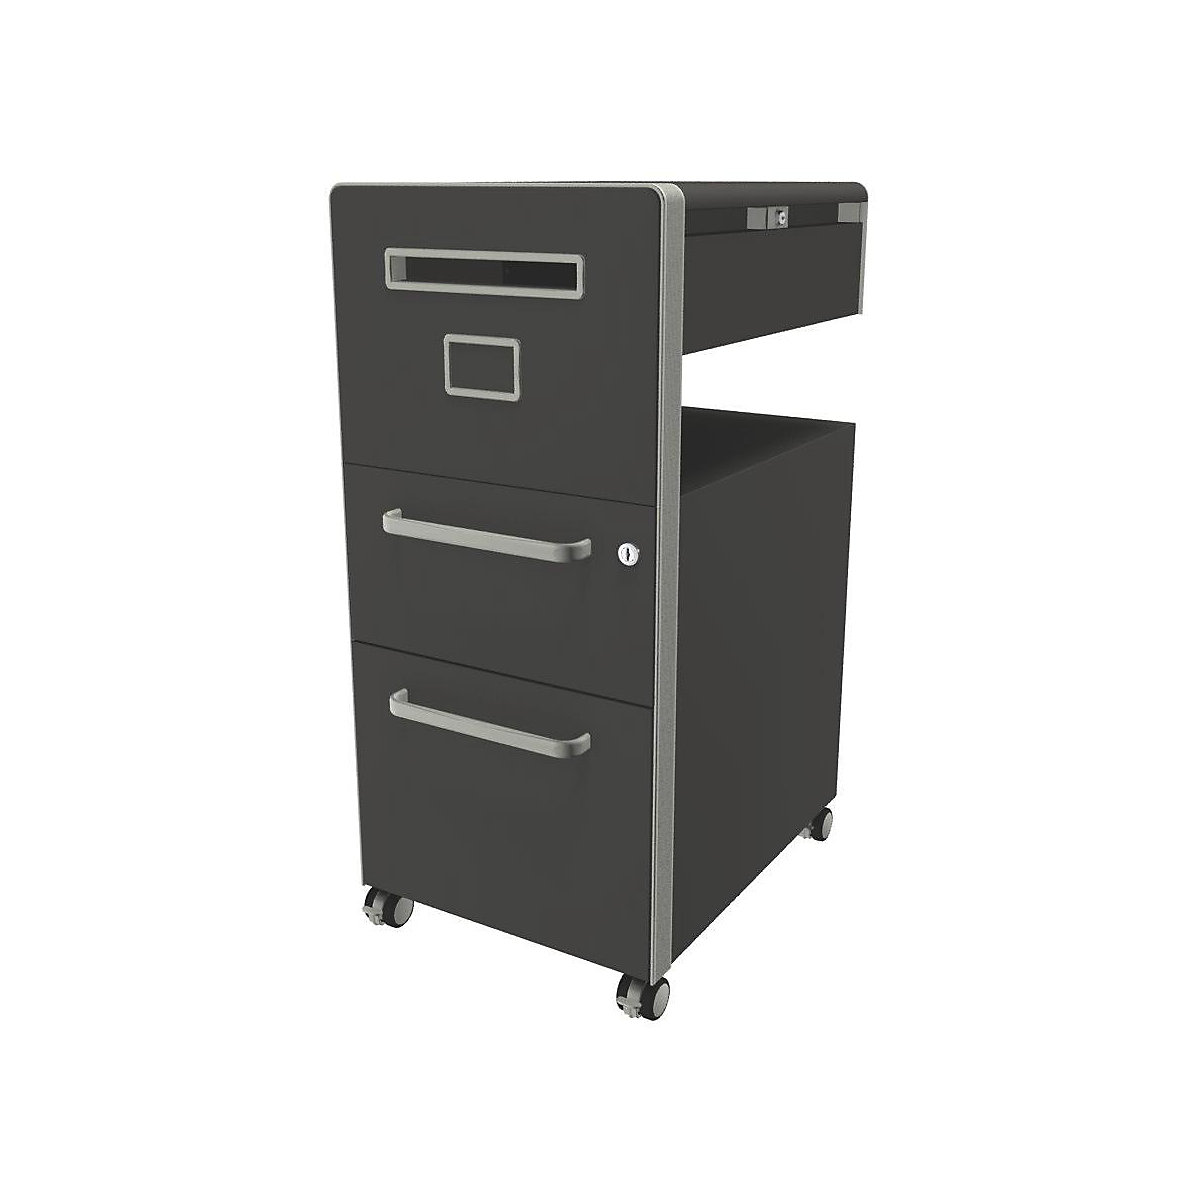 Bite™ pedestal furniture, with 1 pin board, opens on the left side – BISLEY, with 1 universal drawer, 1 suspension file drawer, slate-23